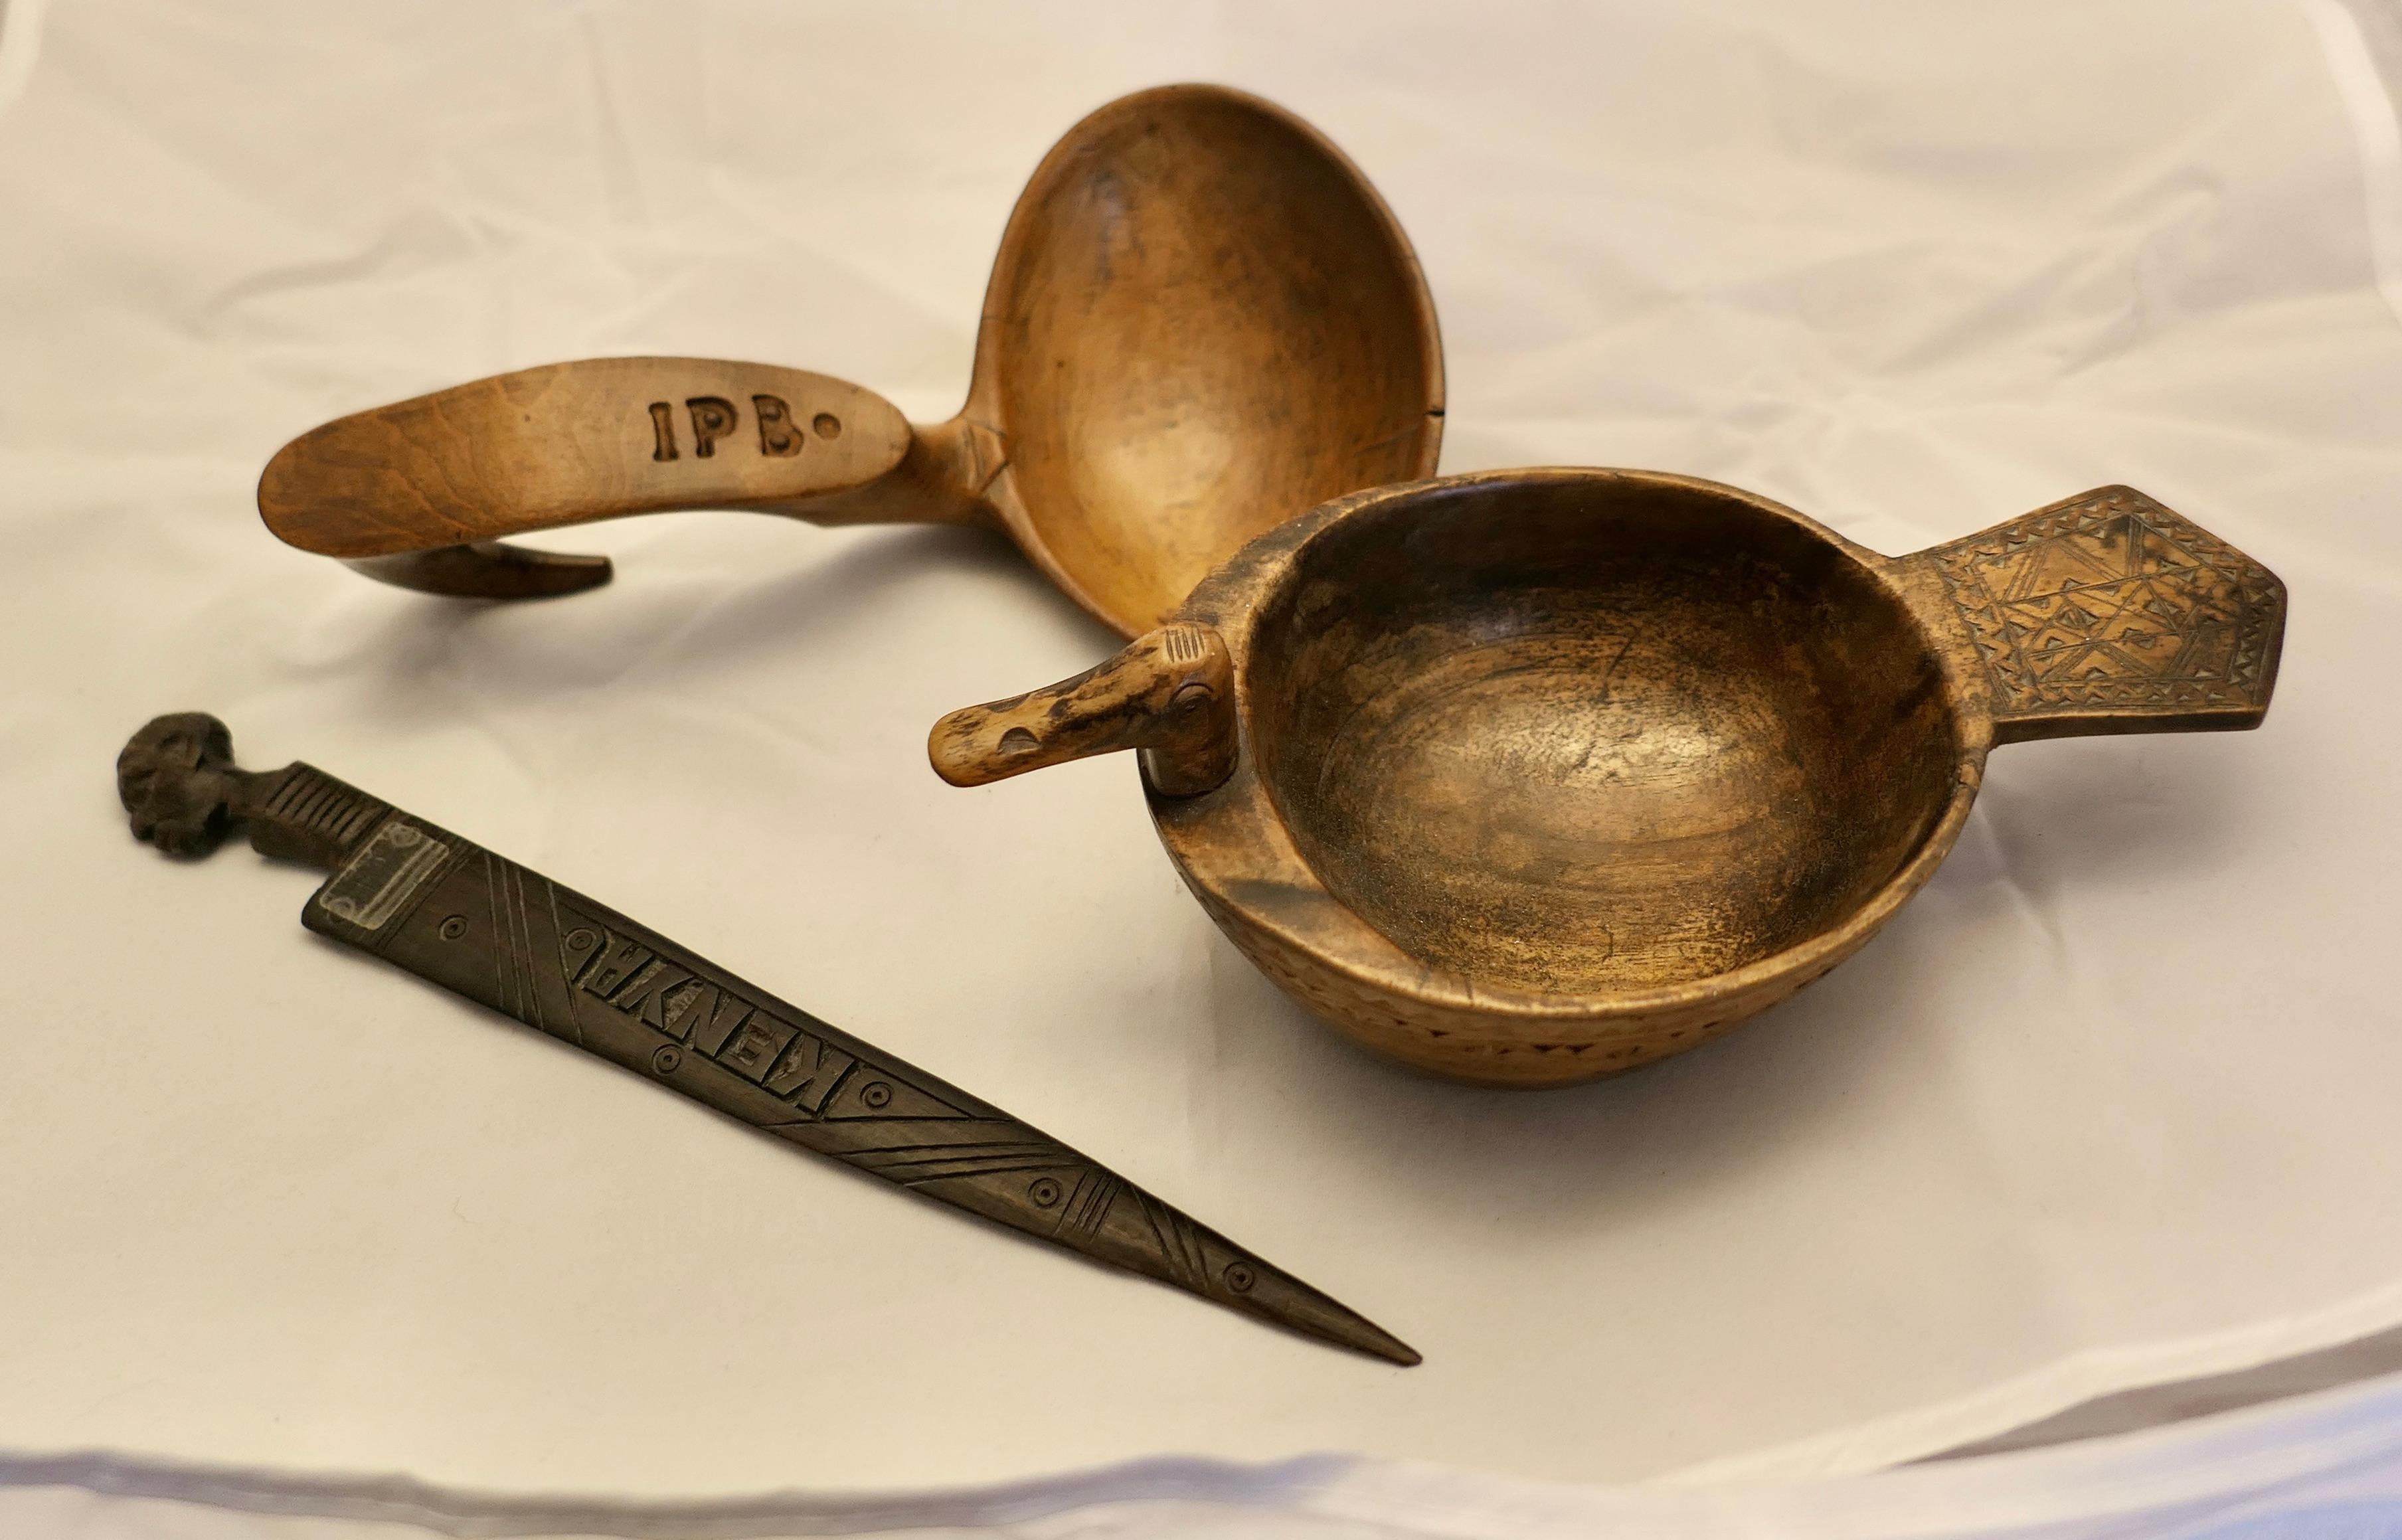 3 Hand Made Folk Art Treen Items

A Bowl in fruit wood carved with a duck’s Head and Tail
A carved Letter opener from Kenya 
And a Carved scoop with IPB. Carved in the handle  
The scoop is 8” long, and 4.5” x 4.5”
SC84
